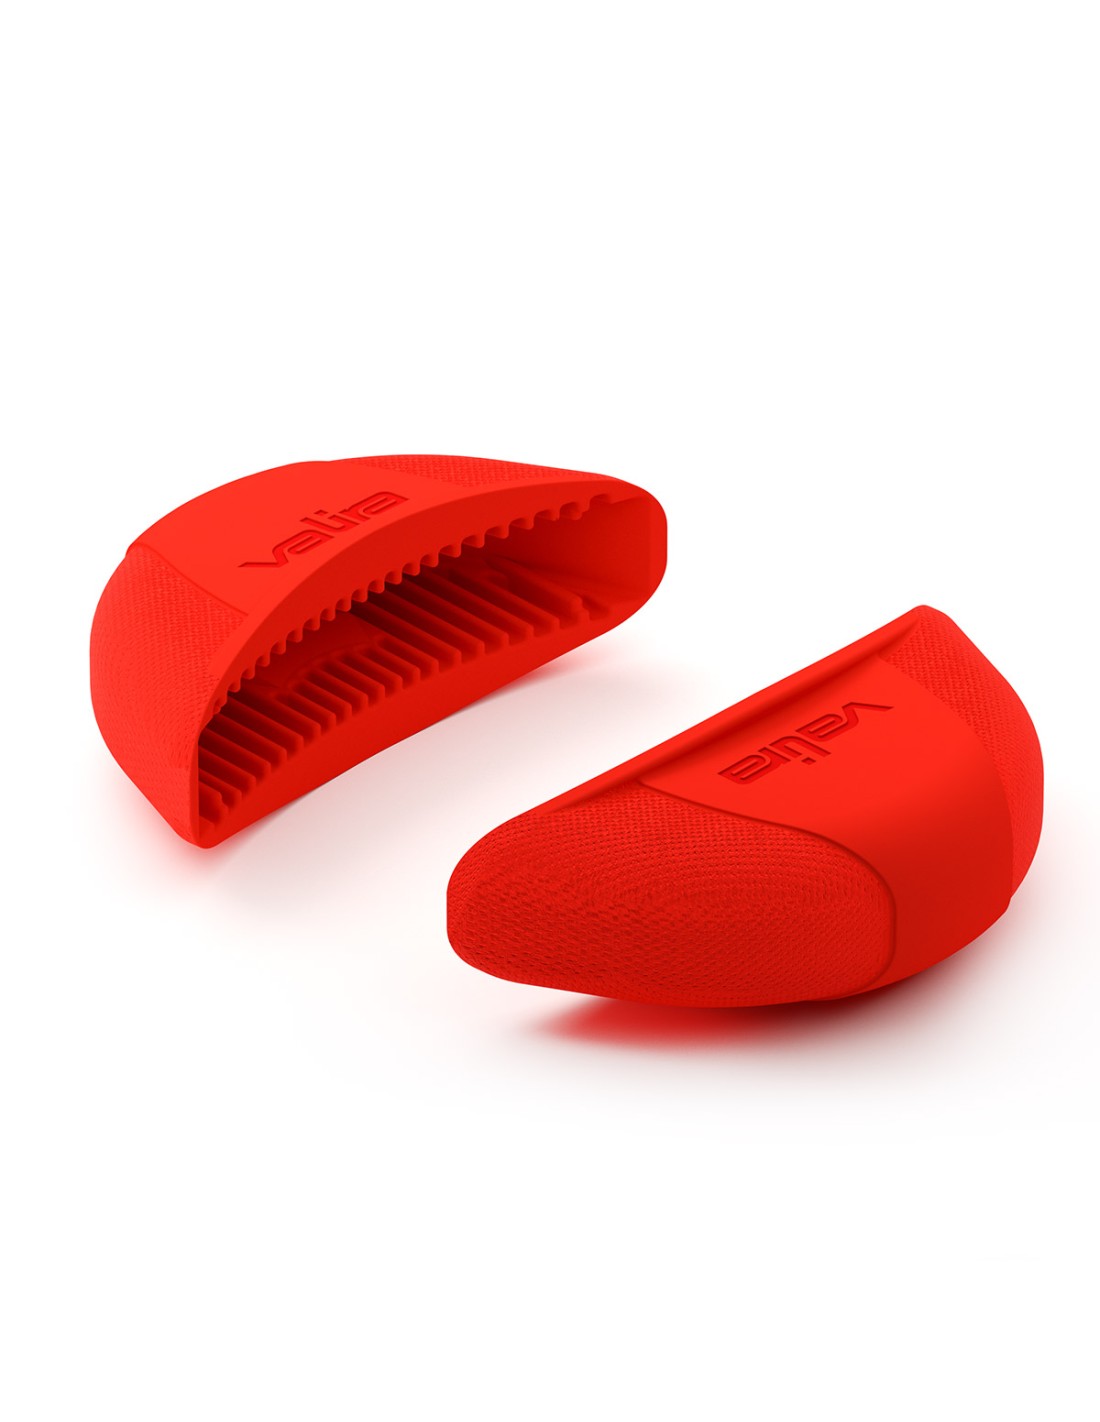 Silicone handles with a soft touch and high thermal resistance [Valira]